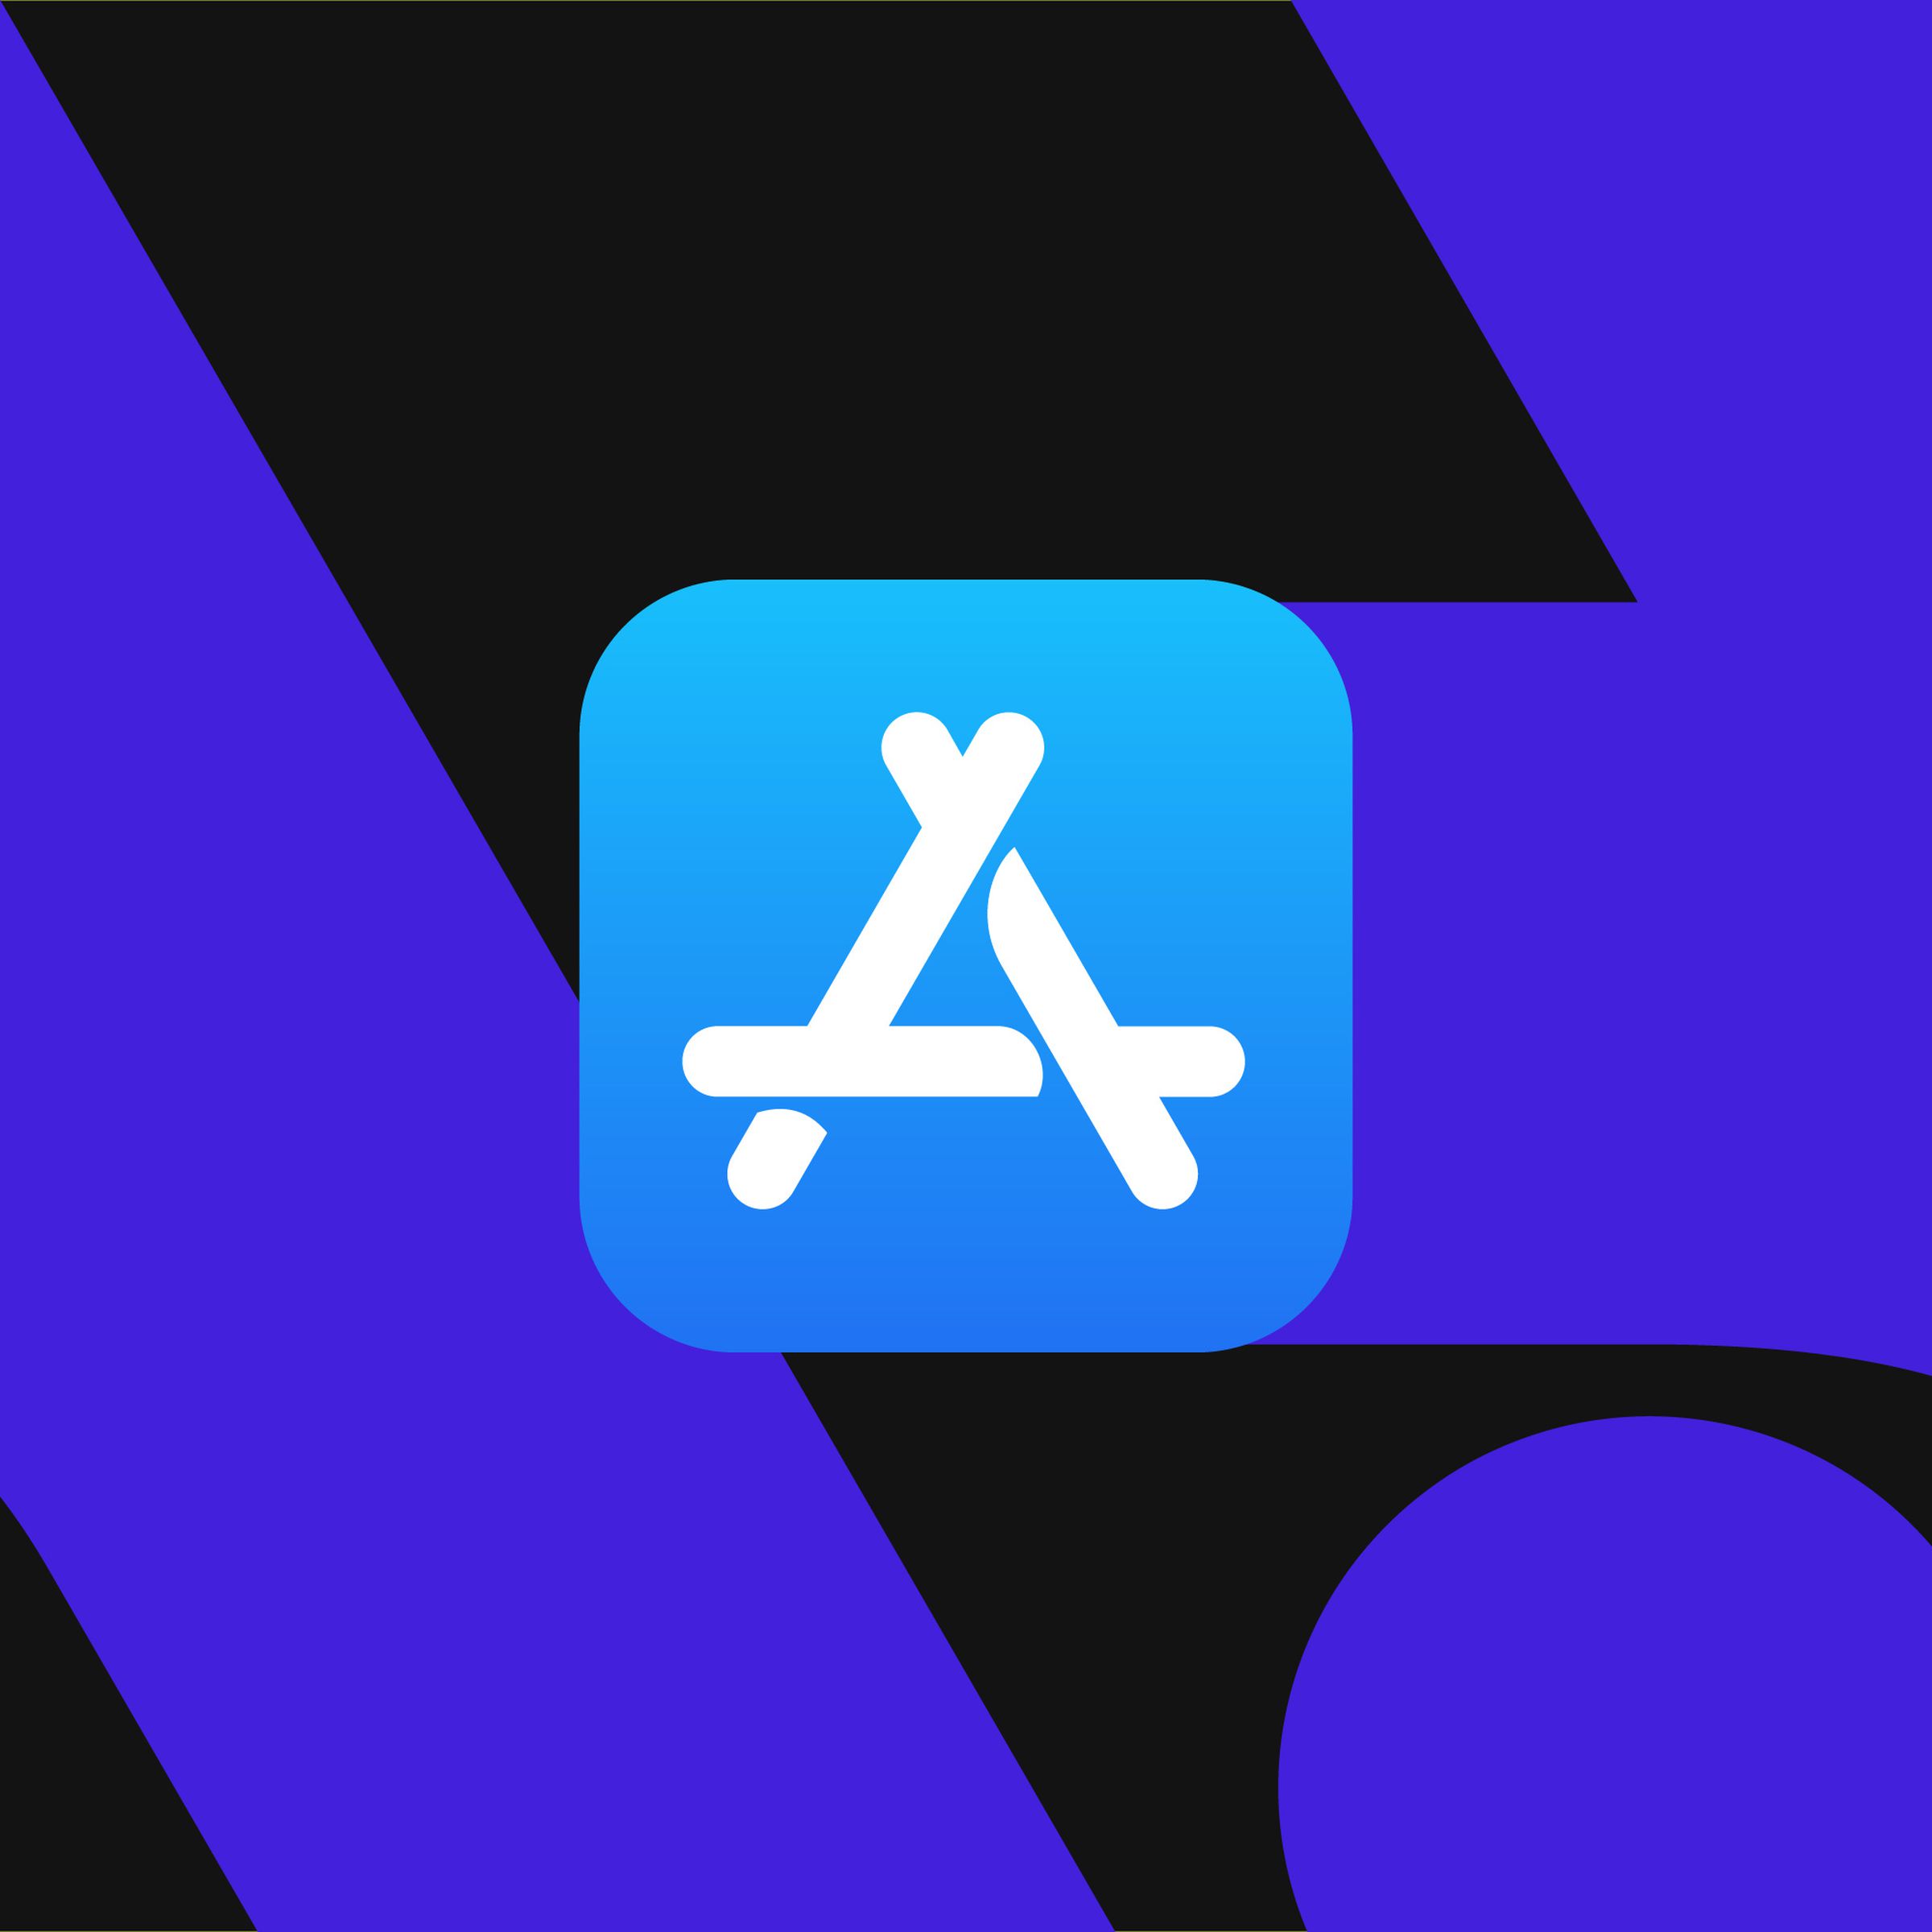 The App Store logo on a black and blue background